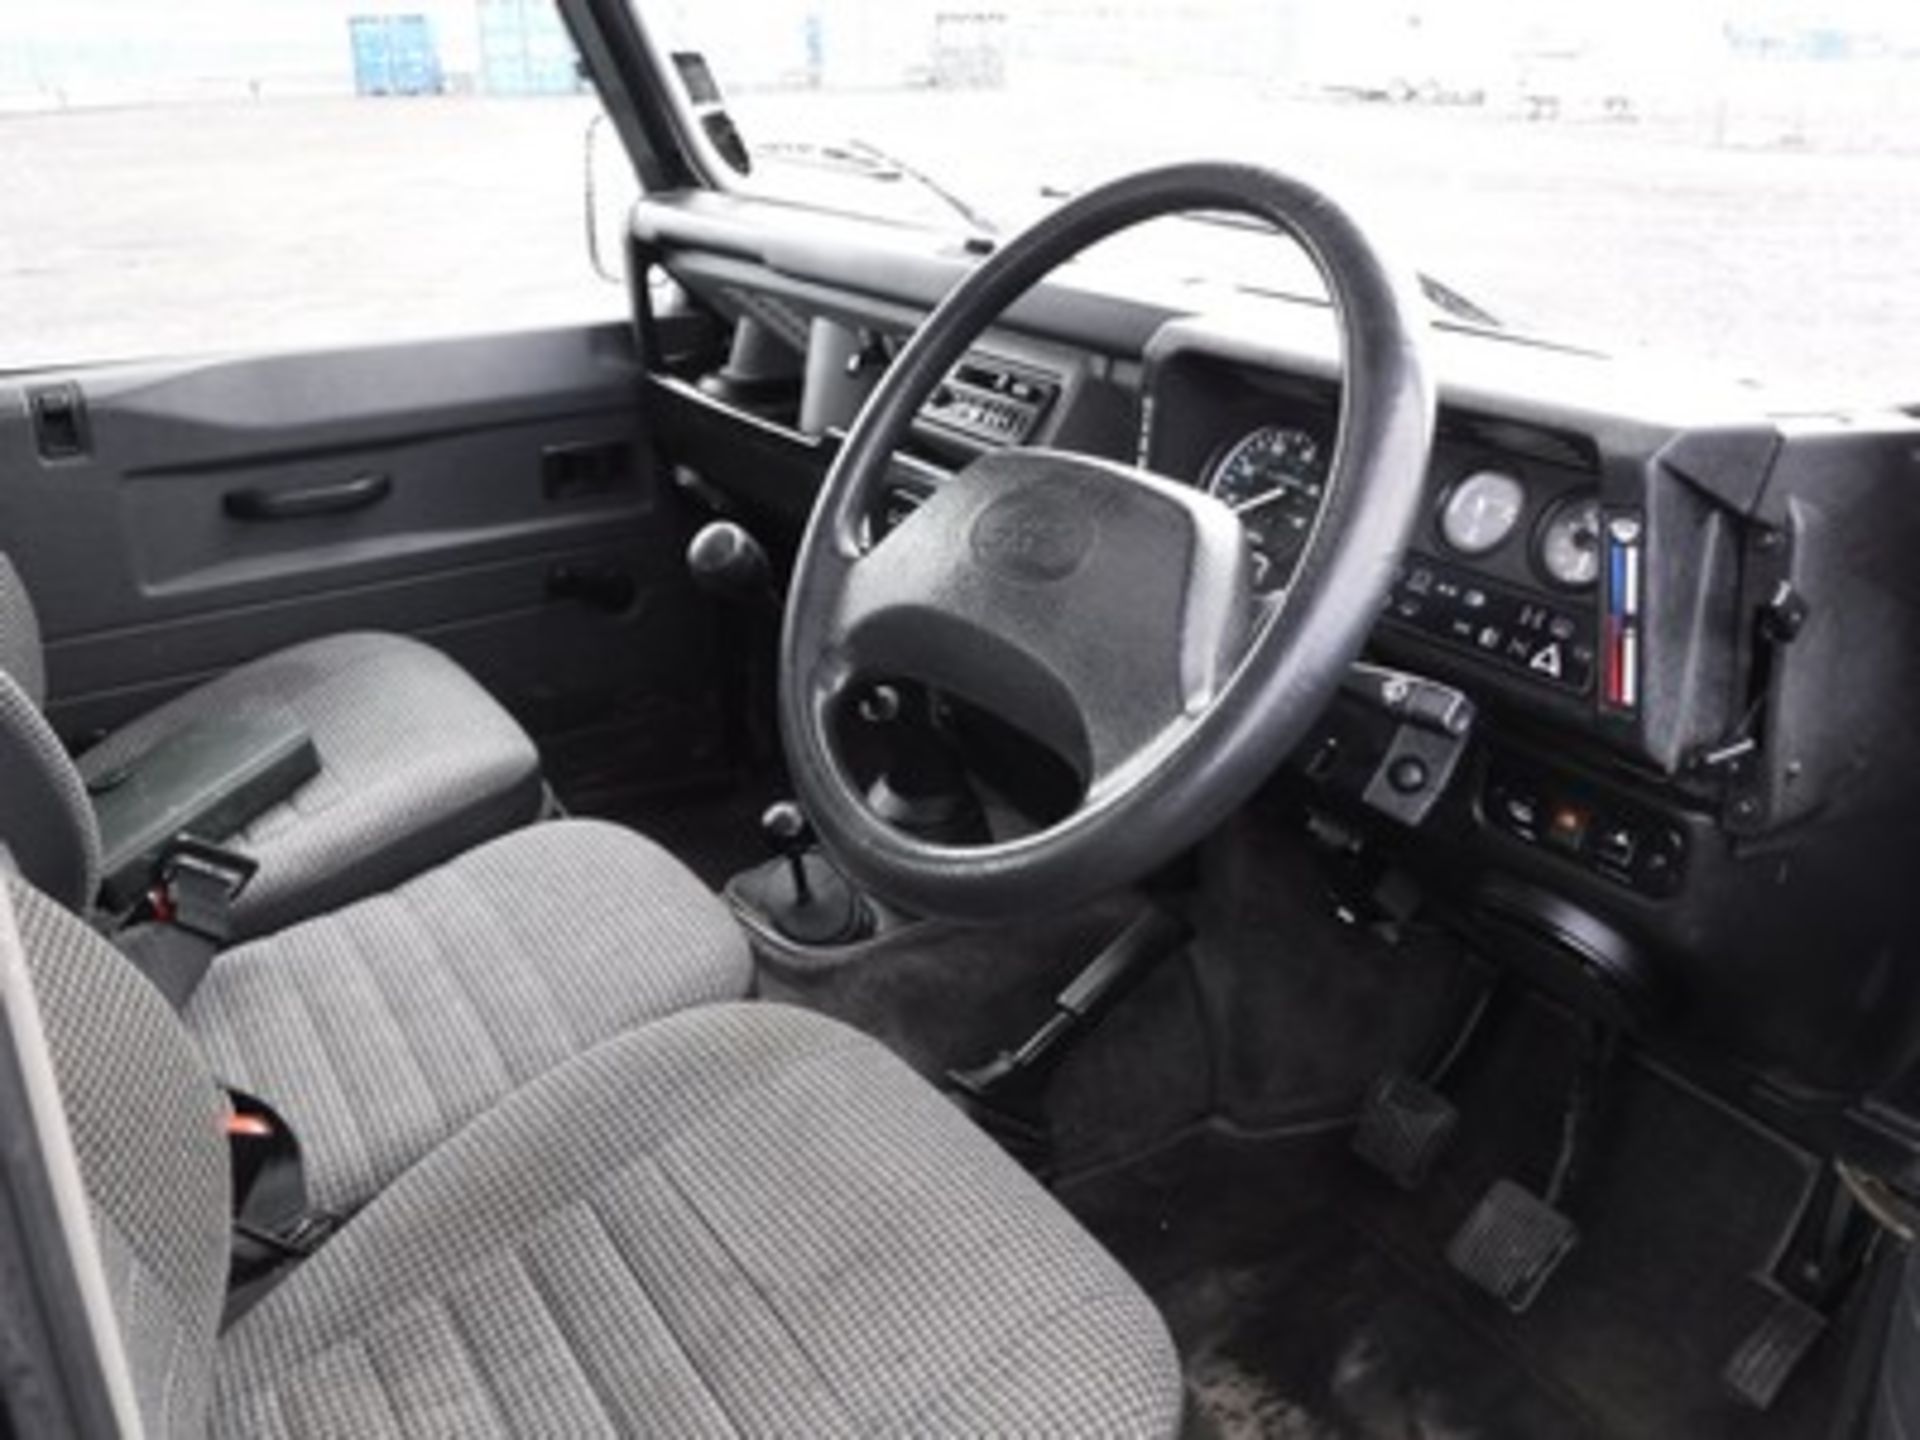 LAND ROVER 90 DEFENDER COUNTY SW TDI - 2495cc - Image 10 of 16